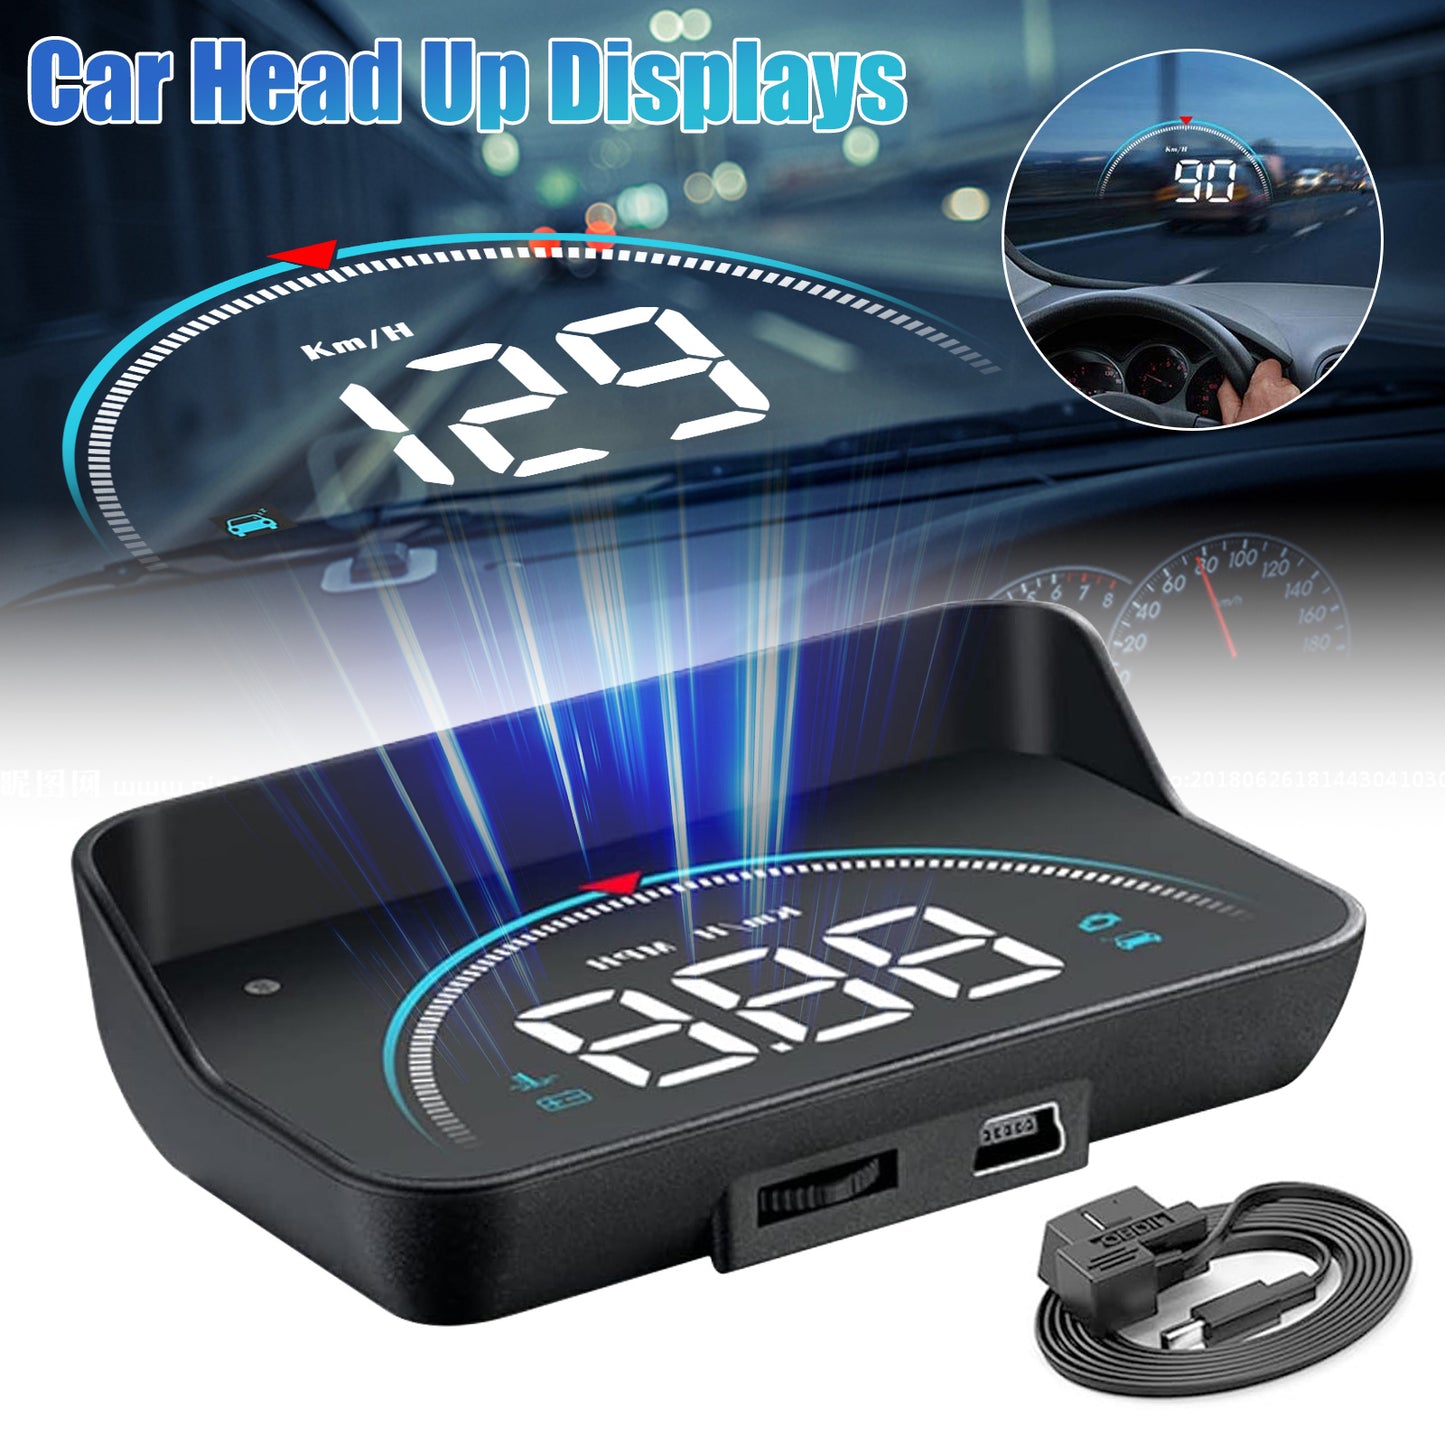 Car Head-Up Display Gauge - 3.5" LED Screen, OBD2 Powered, Multi-Function Monitoring,alerts for high speed, low voltage, or high water temperature